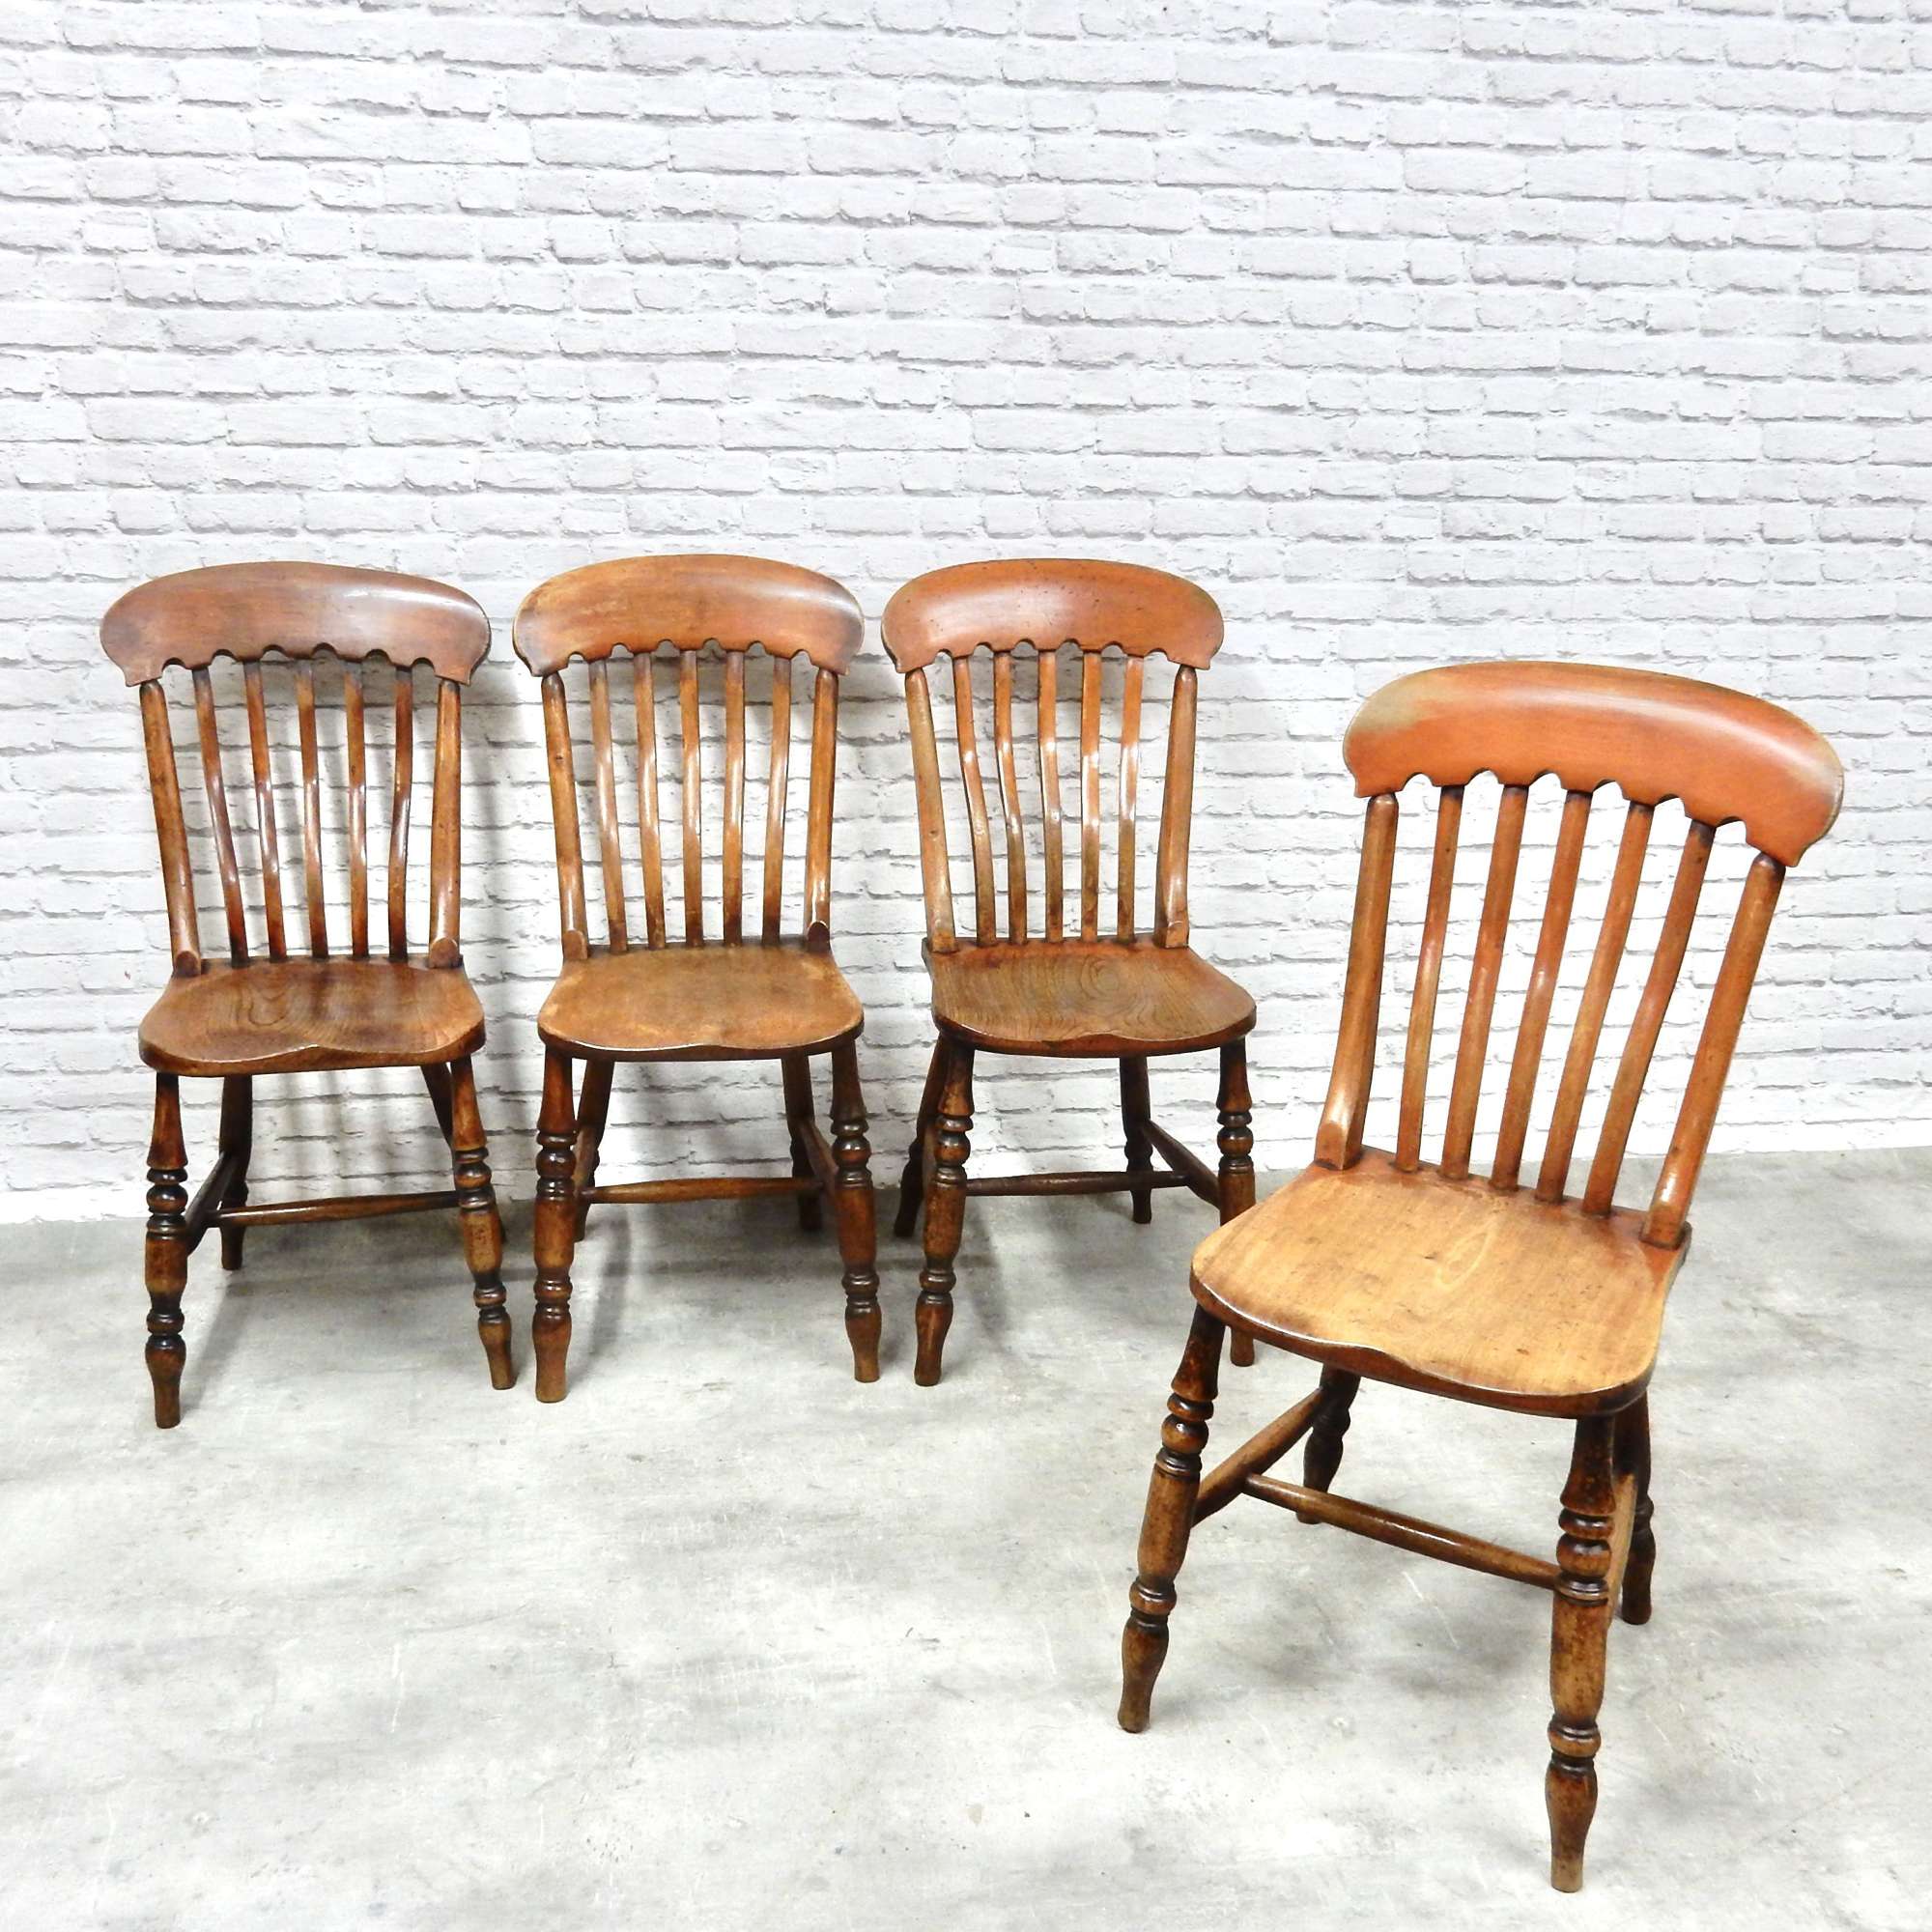 Set 4 Antique Windsor Chairs